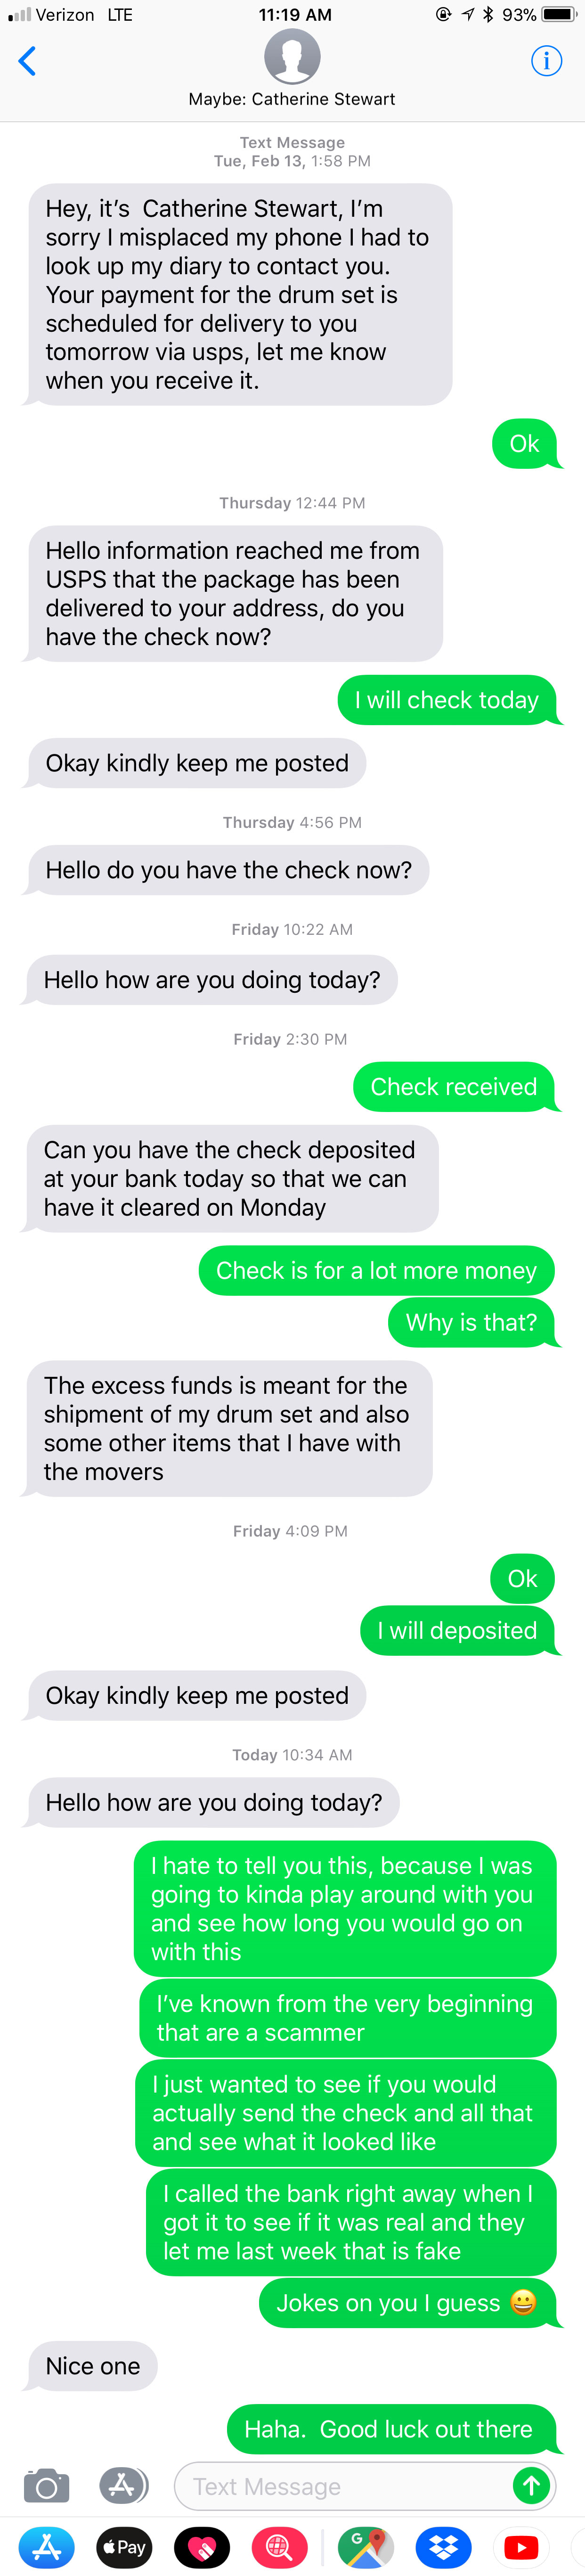 Just Some Fun With an Online Classifieds Scammer from ...